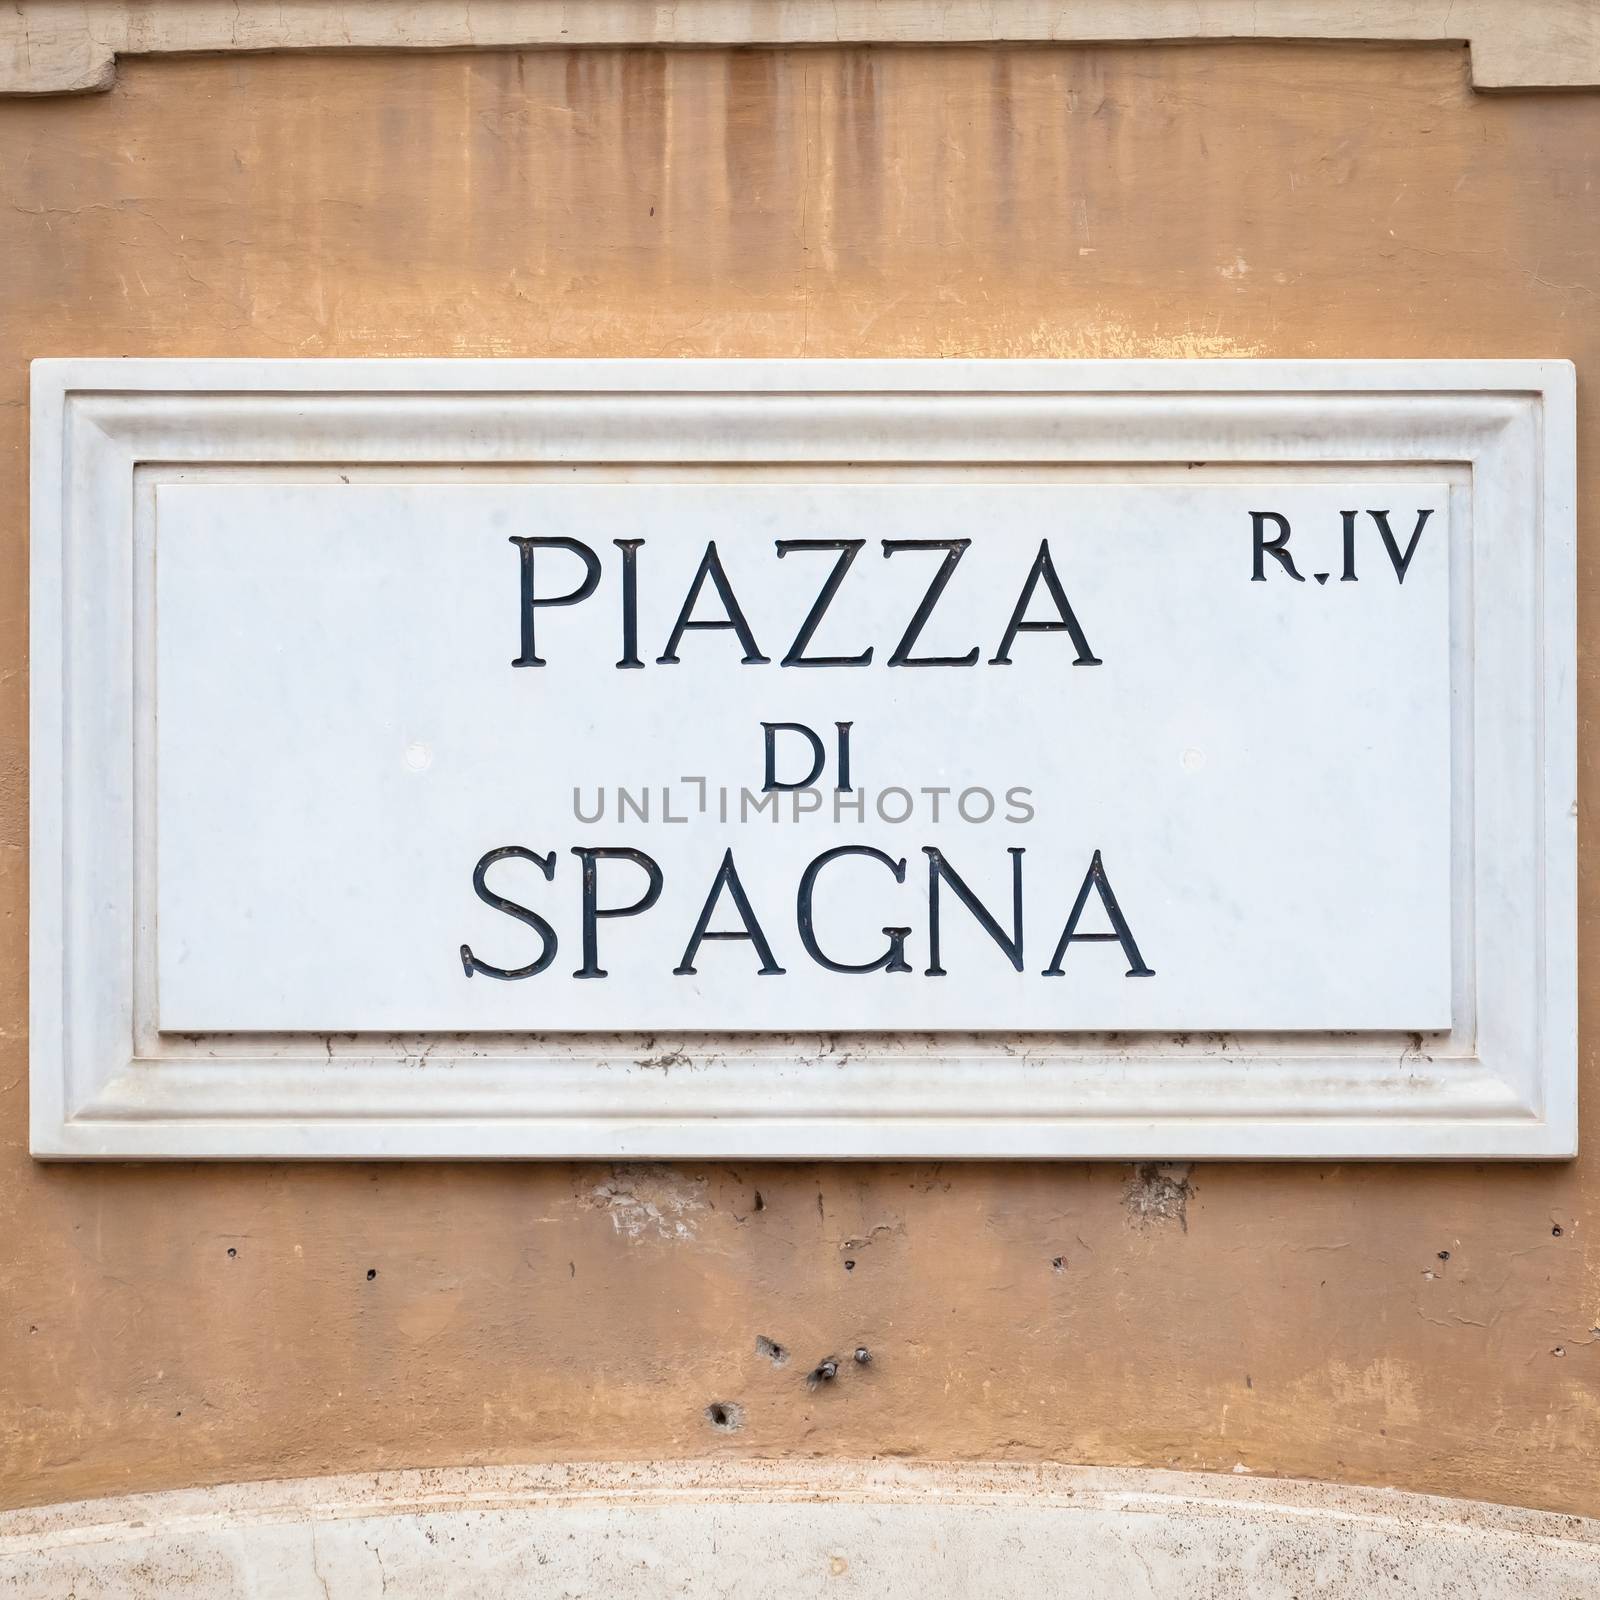 Street sign: Piazza di Spagna (Spain Square) in Rome by Perseomedusa